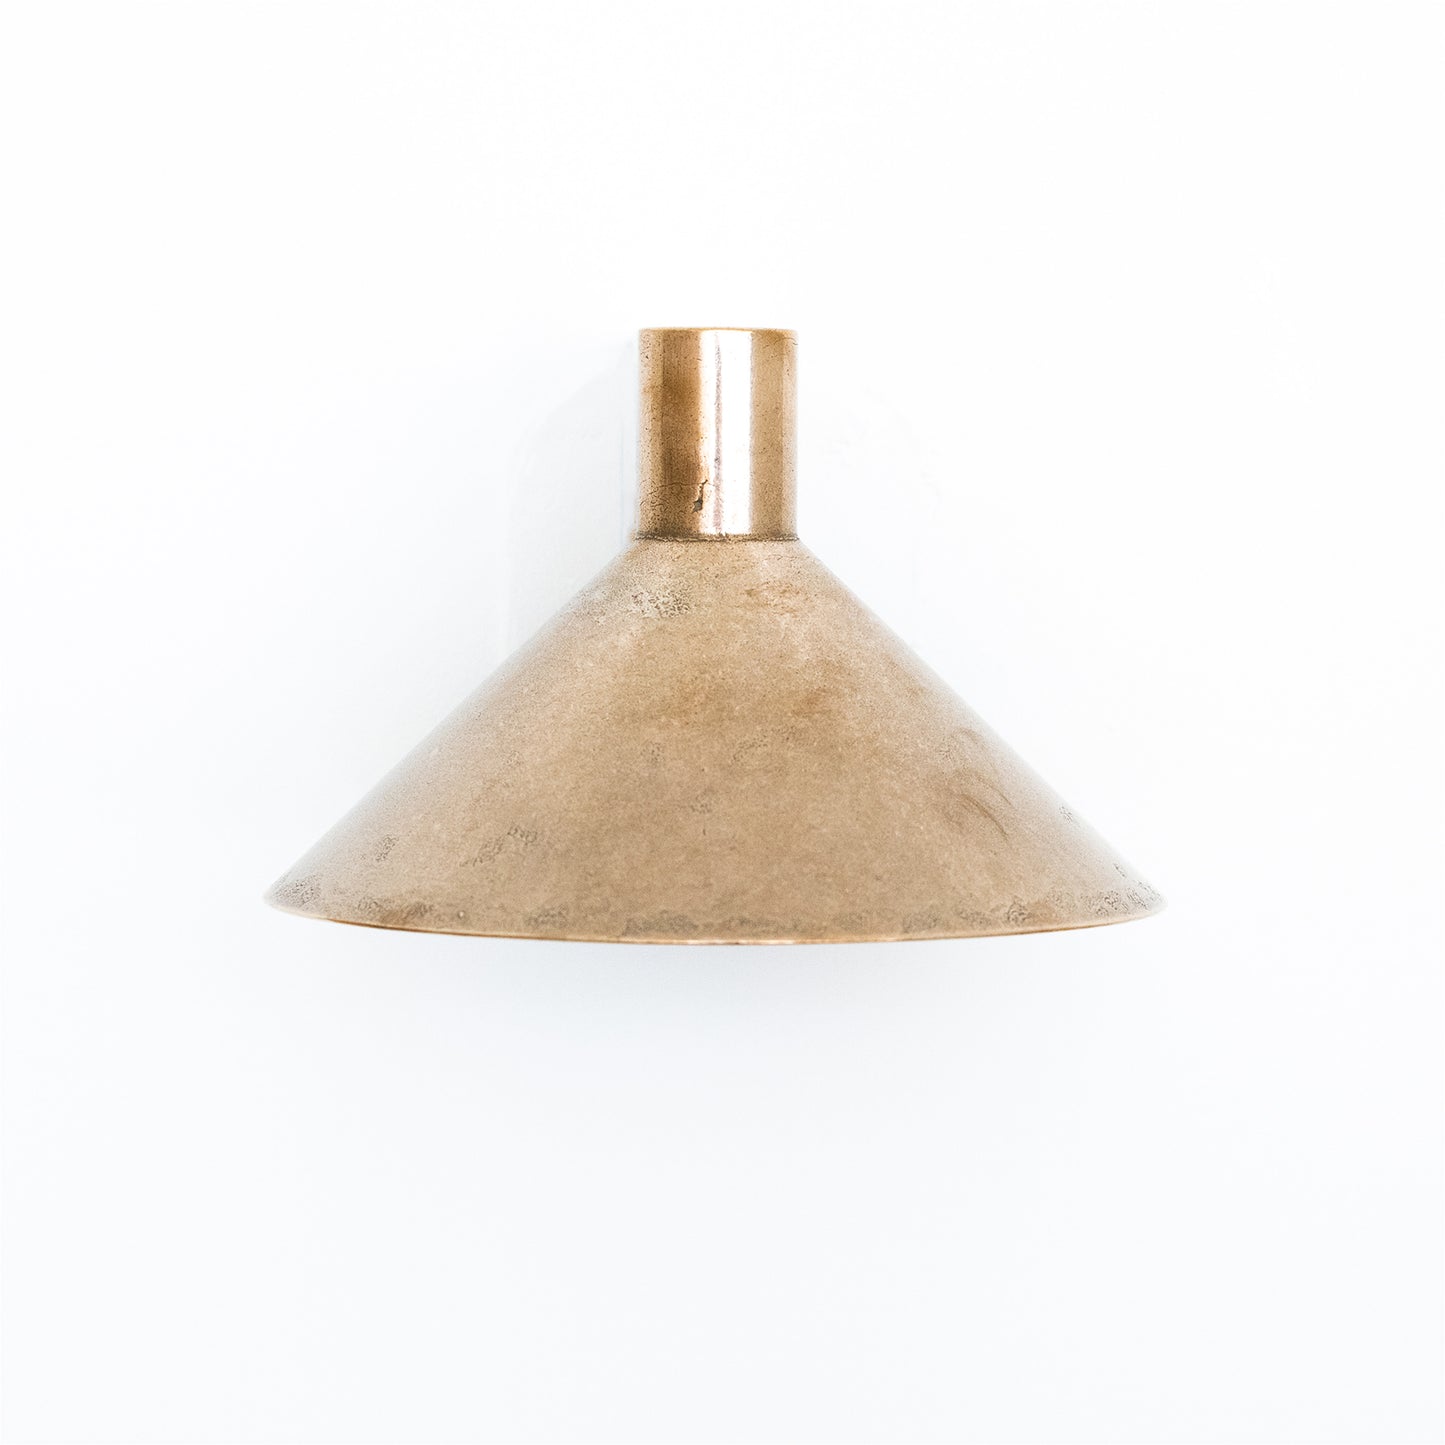 Conical Wall Light